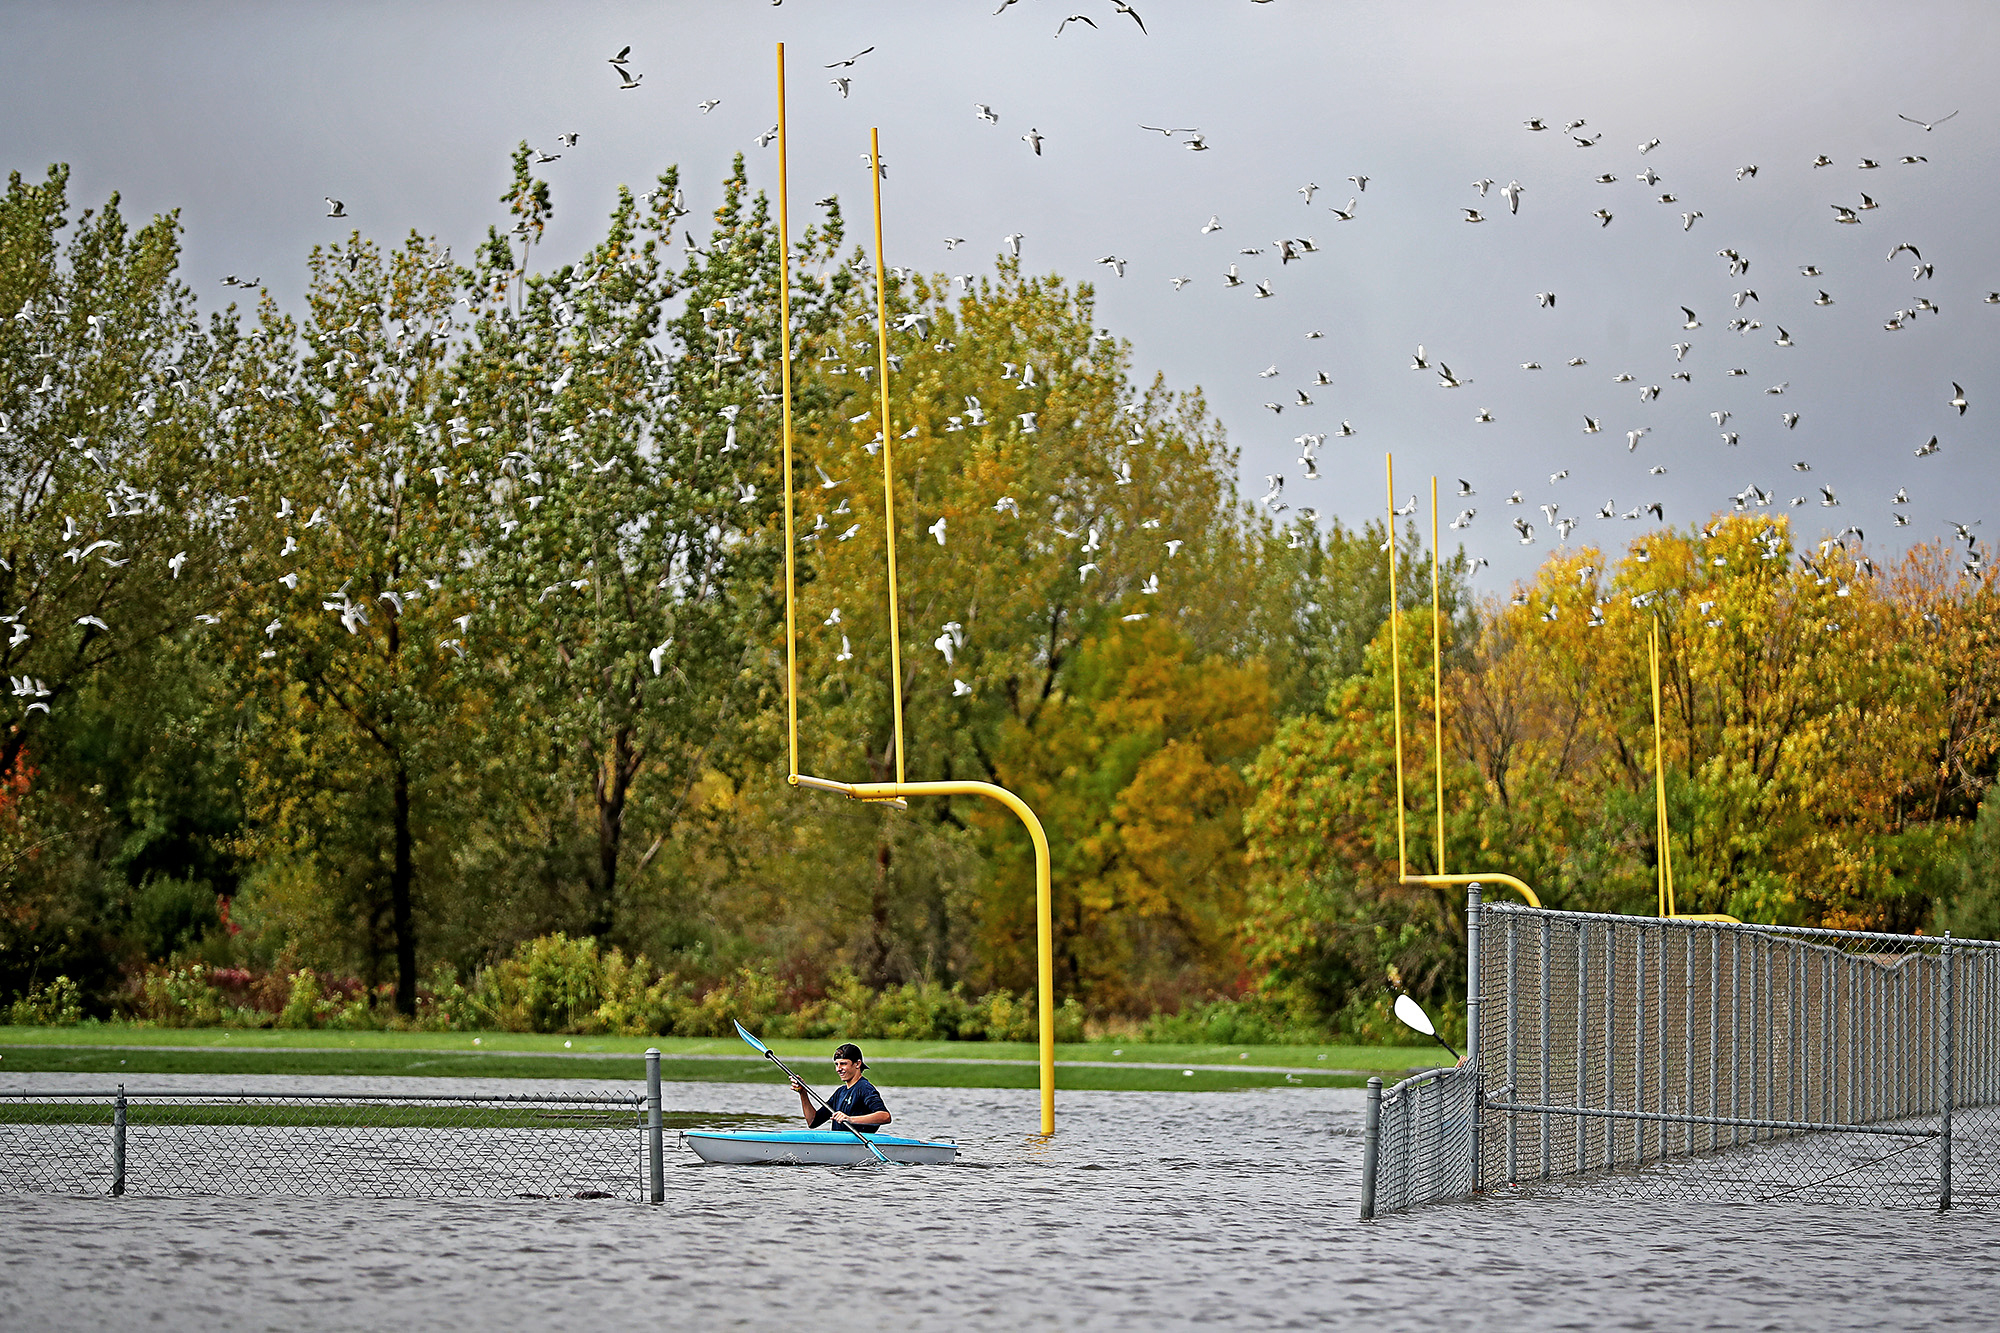 PHOTO: Justin Sampson, a member of the Waseca High School football team checks out the flooding on the football field from a kayak near the Waseca High School, Sept.  22, 2016, in Waseca, Minnesota.